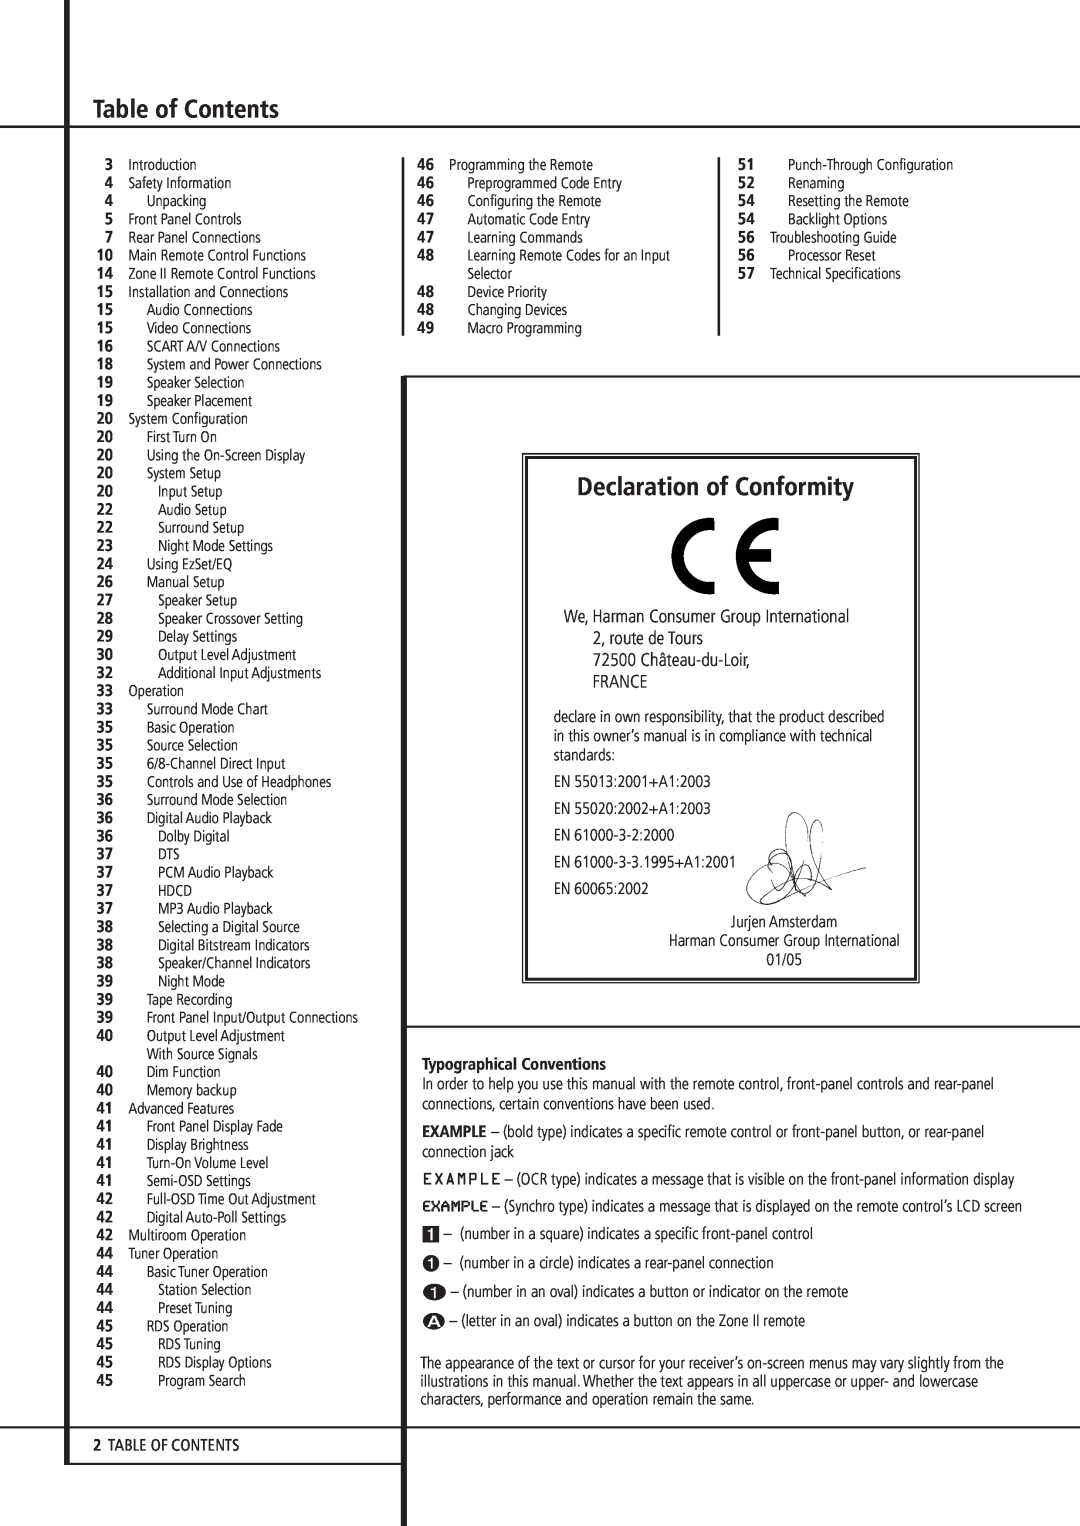 Pacific Digital AVR 635 owner manual Table of Contents, Declaration of Conformity, We, Harman Consumer Group International 